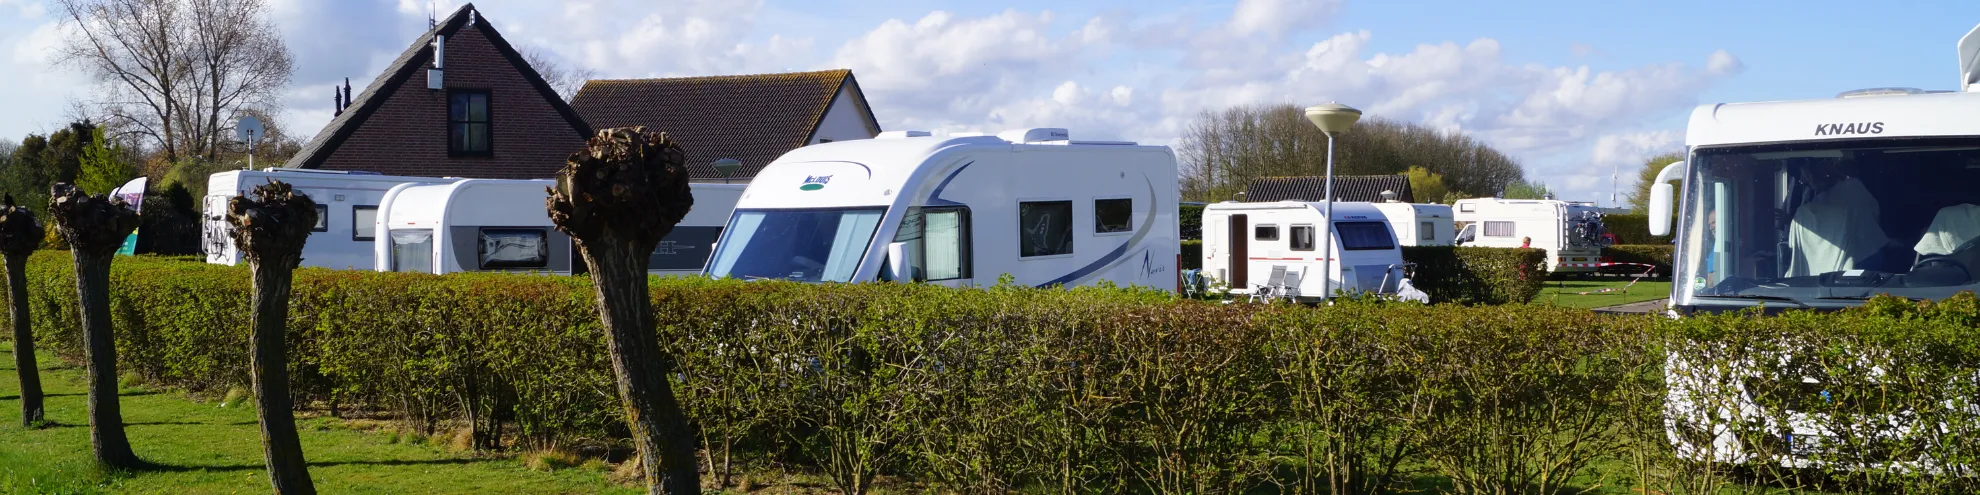 Camping Le Parage